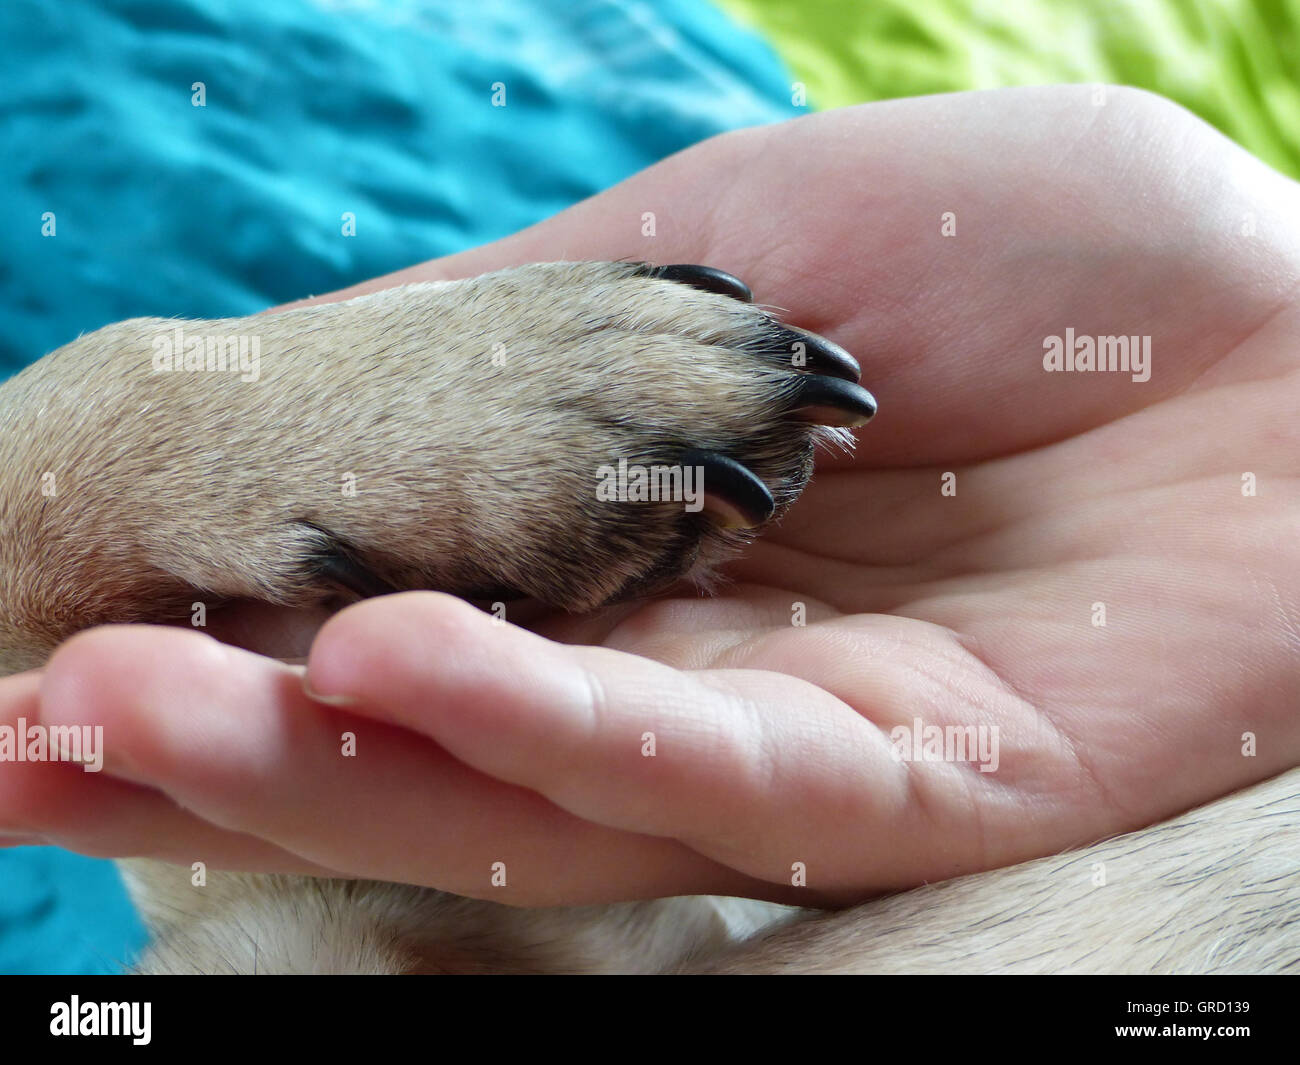 Dog Paw Is In Human Hand, Dog Gives Paw, Symbol For Friendship, Detail Stock Photo